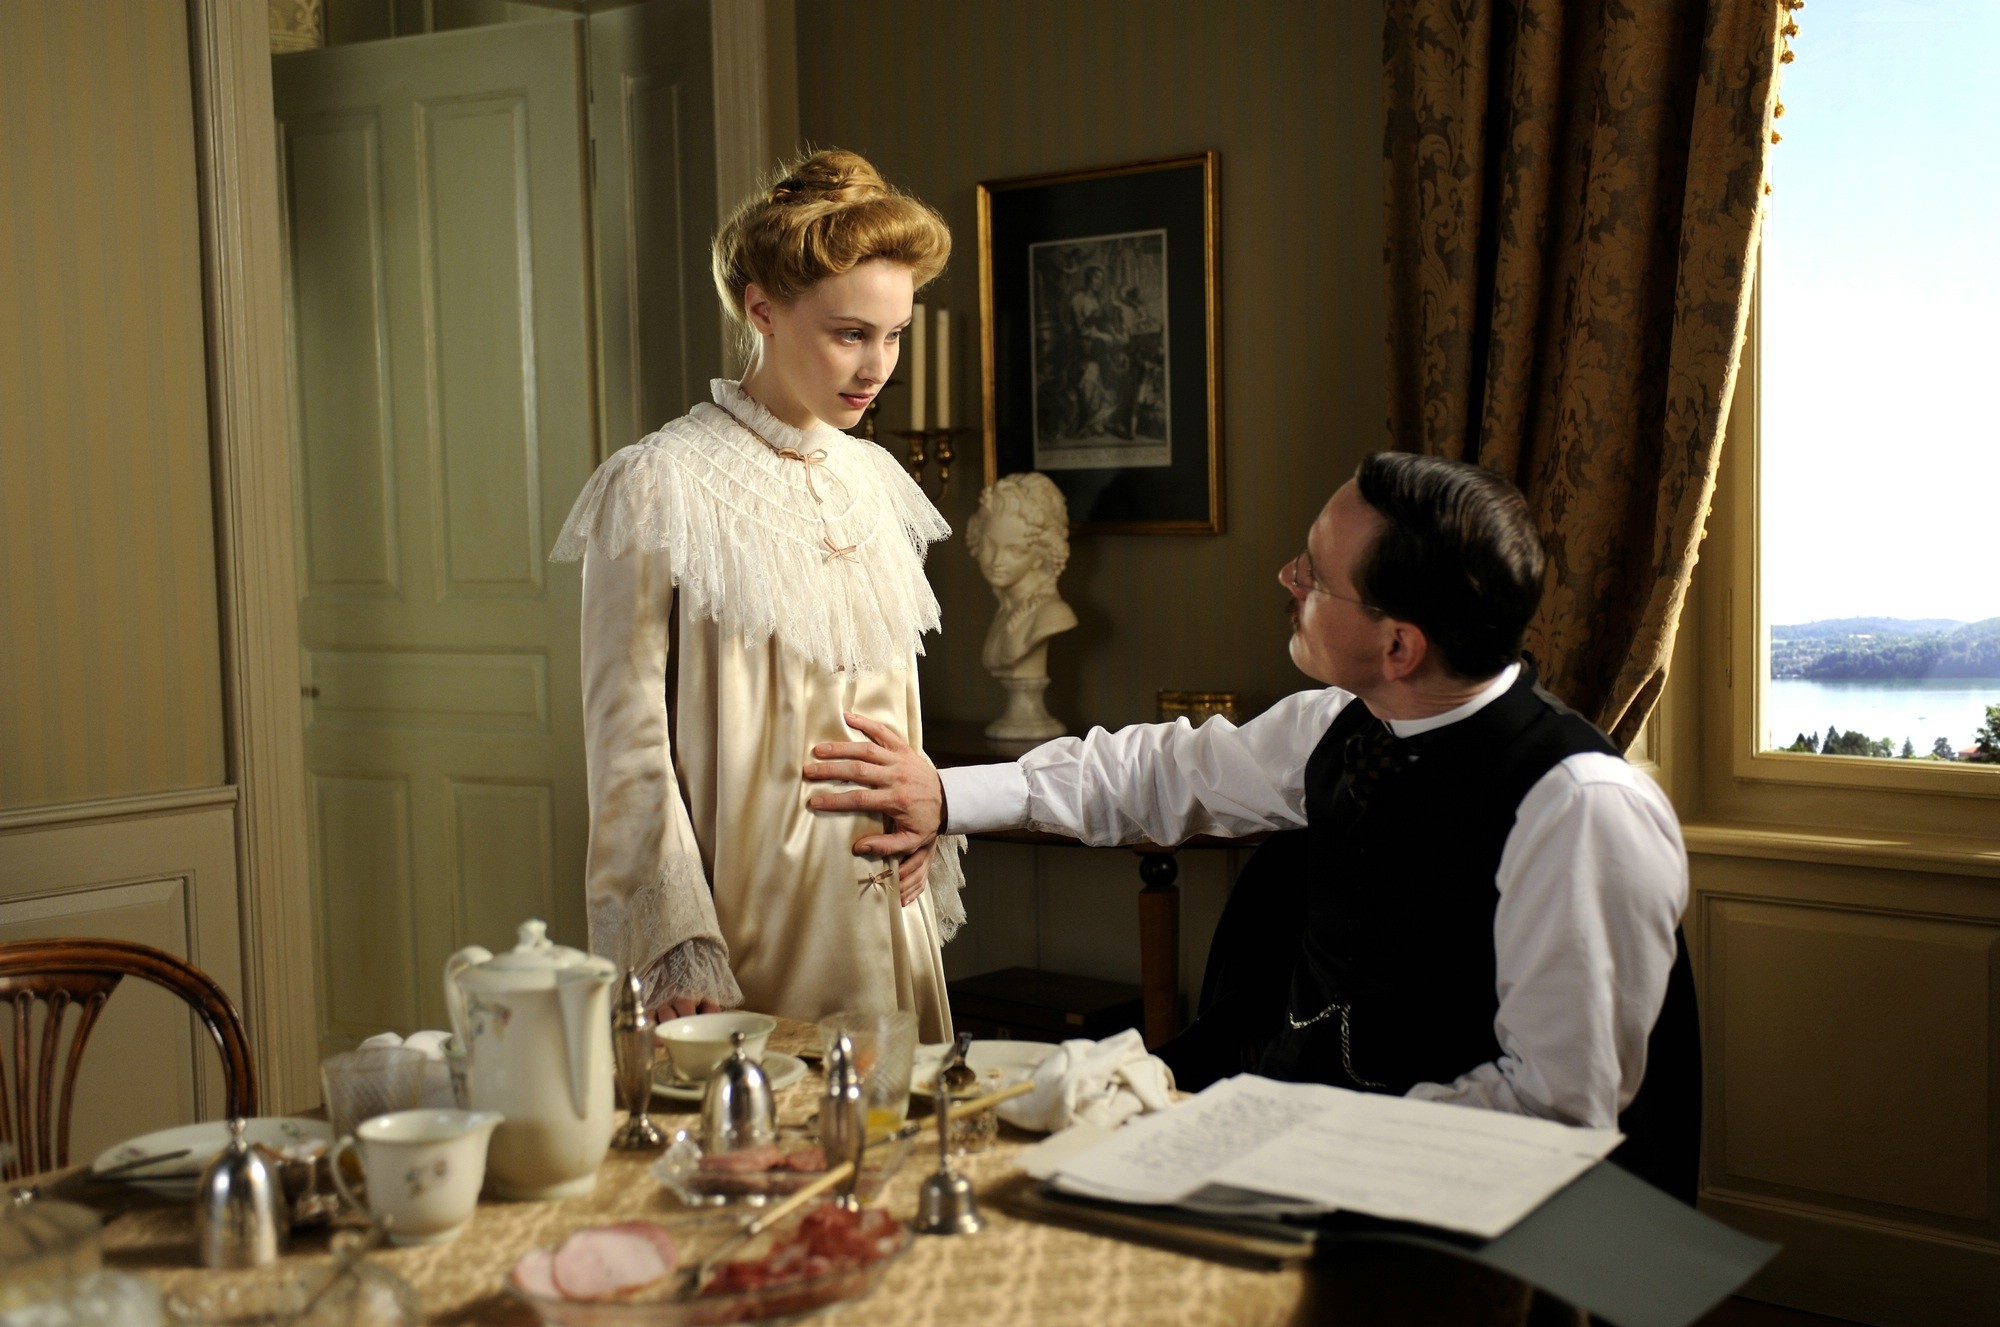 Sarah Gadon stars as Emma Jung and Michael Fassbender stars as Carl Jung in Sony Pictures Classics' A Dangerous Method (2011)